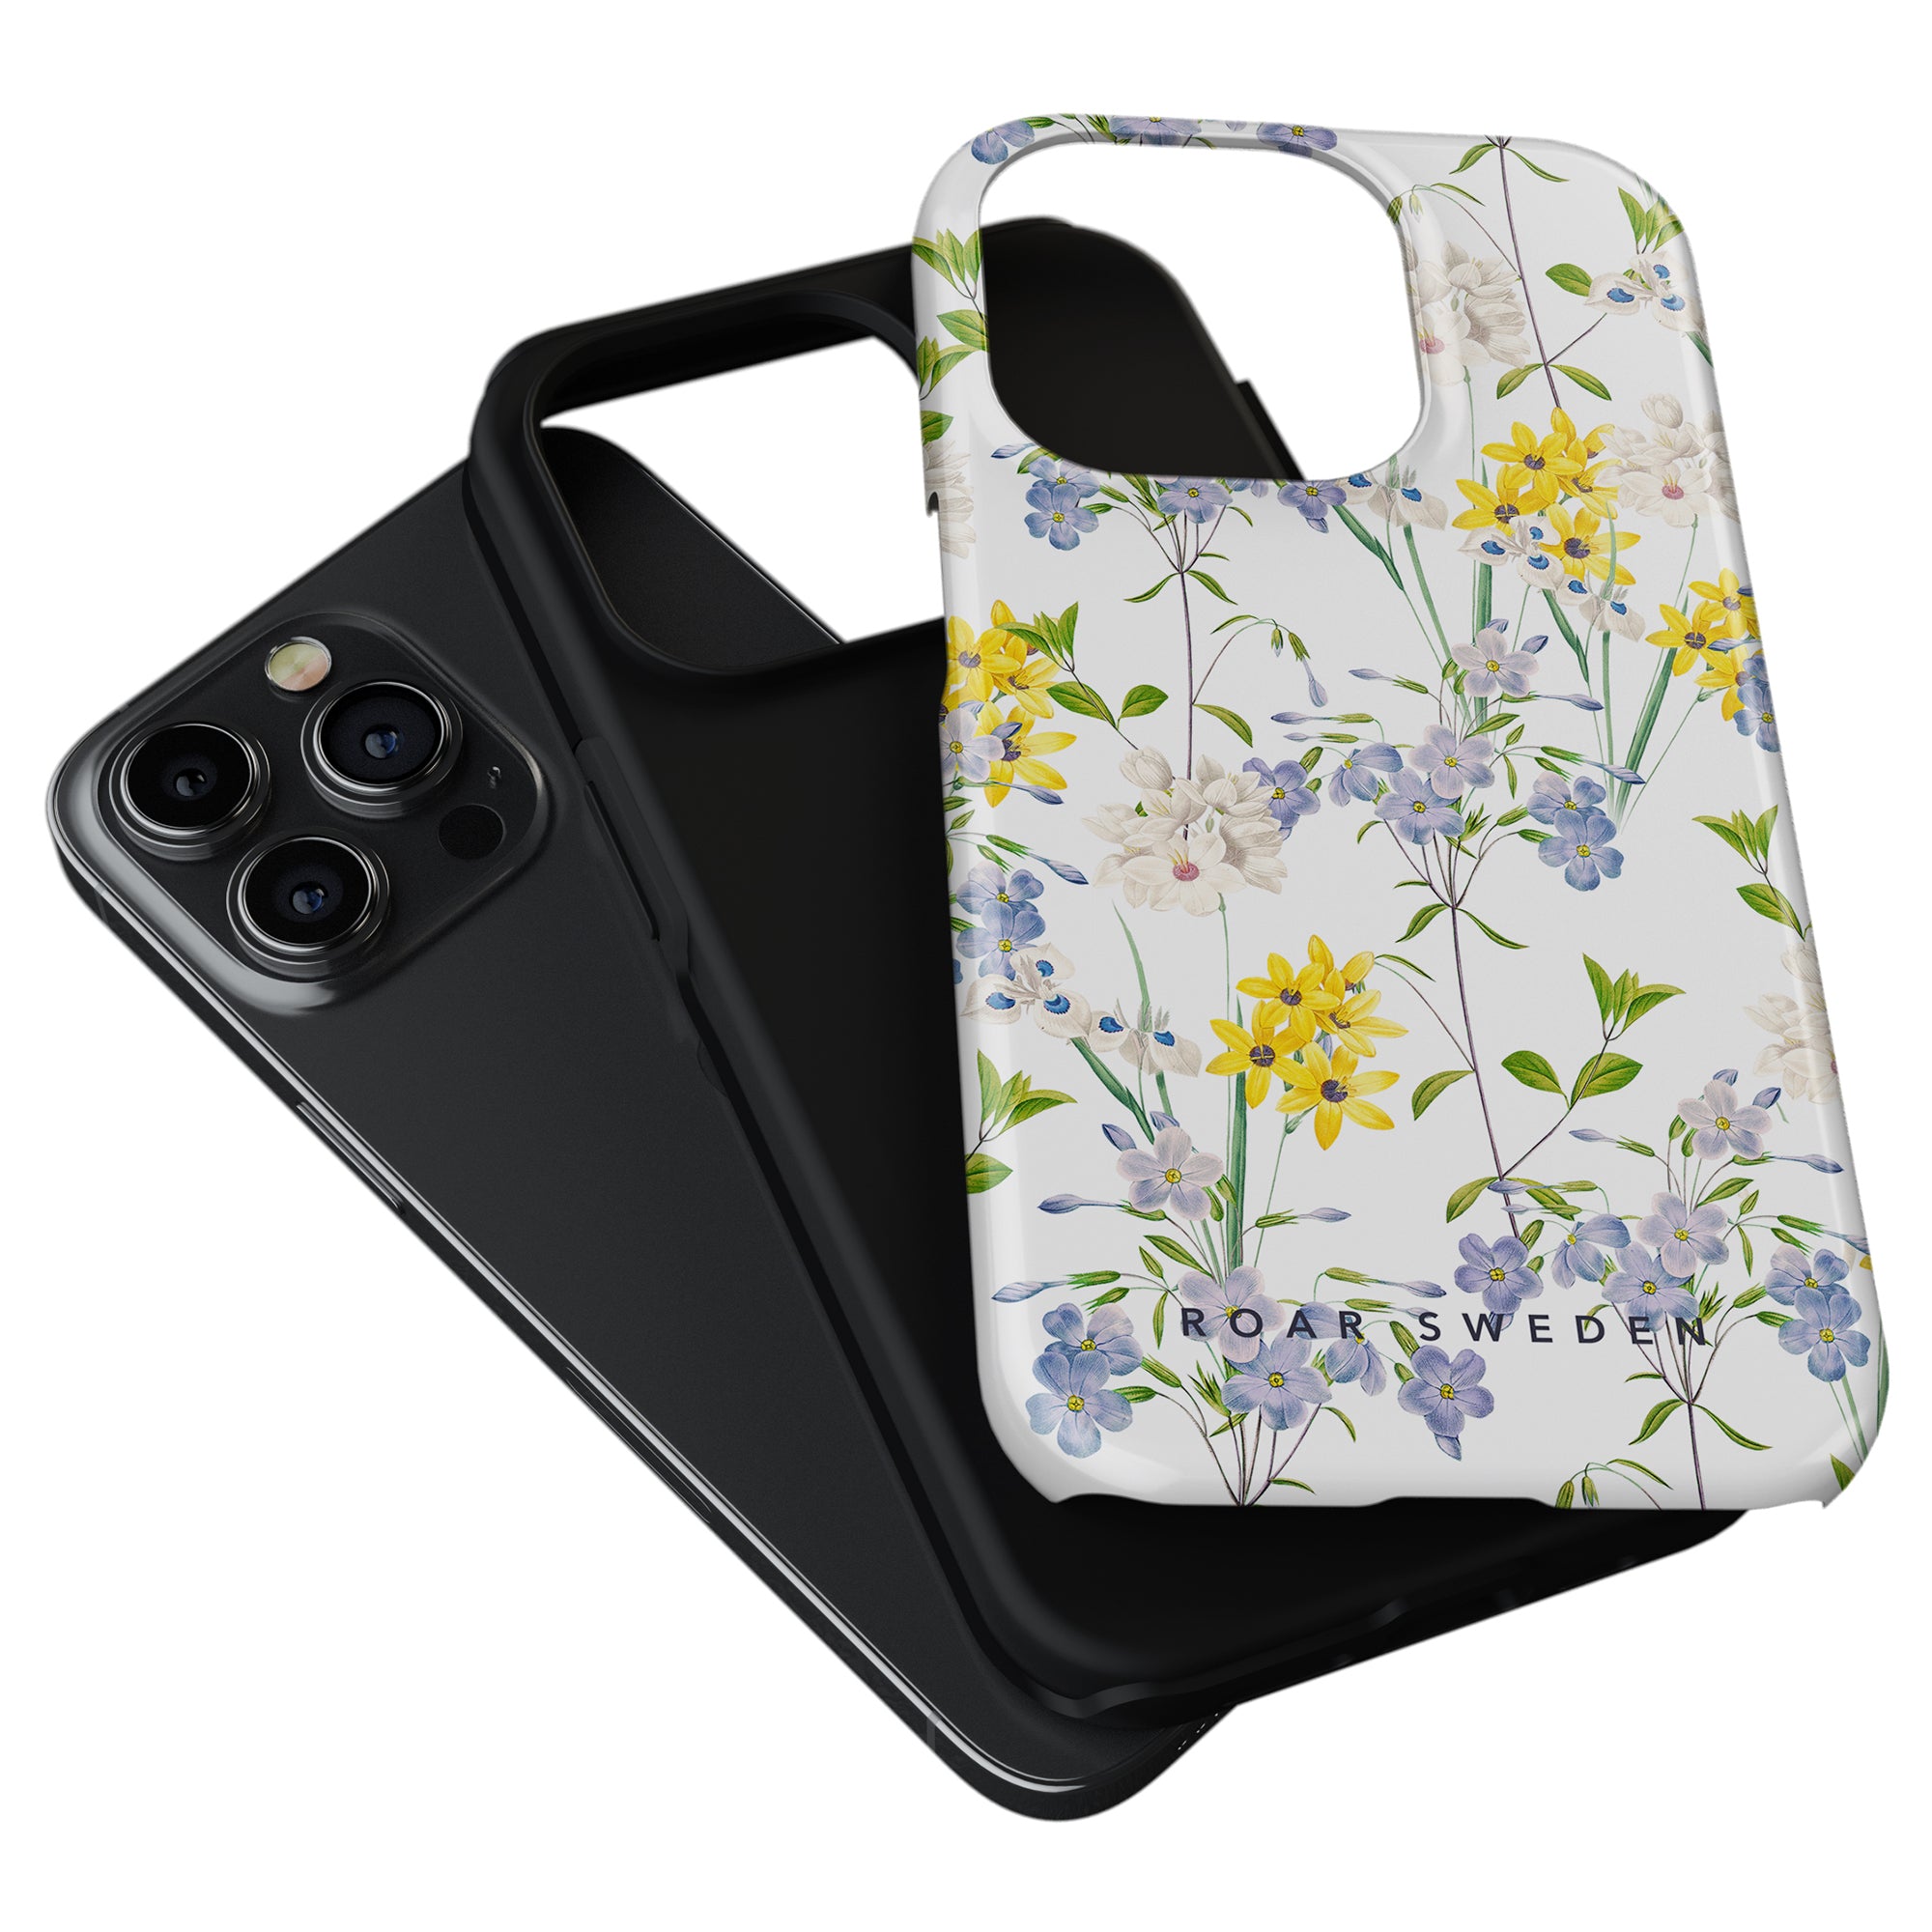 A black smartphone with a triple-camera setup next to a Summer Flowers - Tough Case phone case with a cut-out for the camera and wireless earbuds.